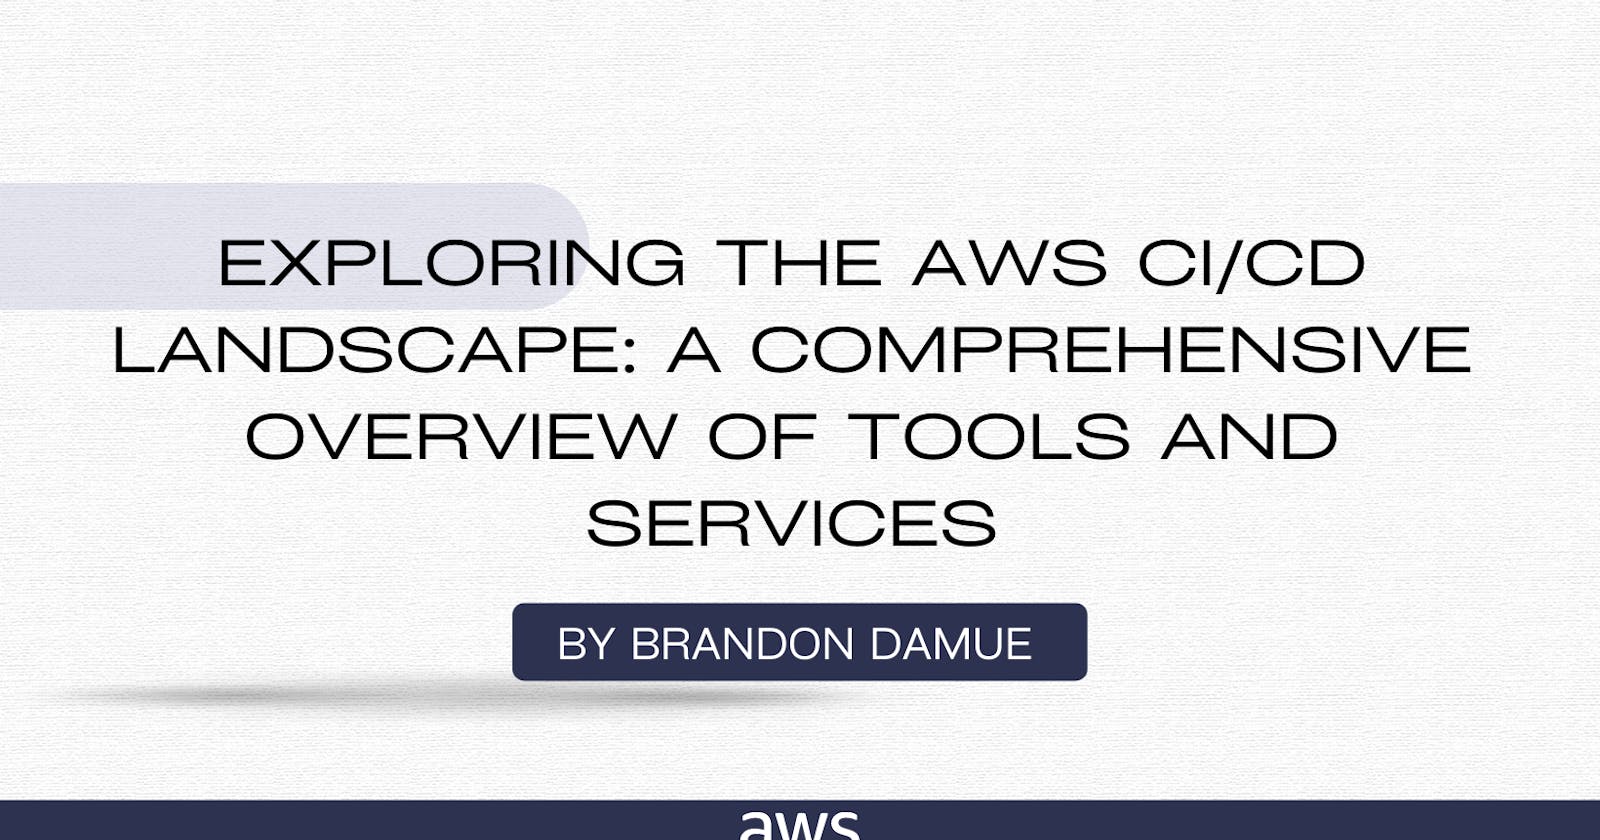 Exploring the AWS CI/CD Landscape: A Comprehensive Overview of Tools and Services